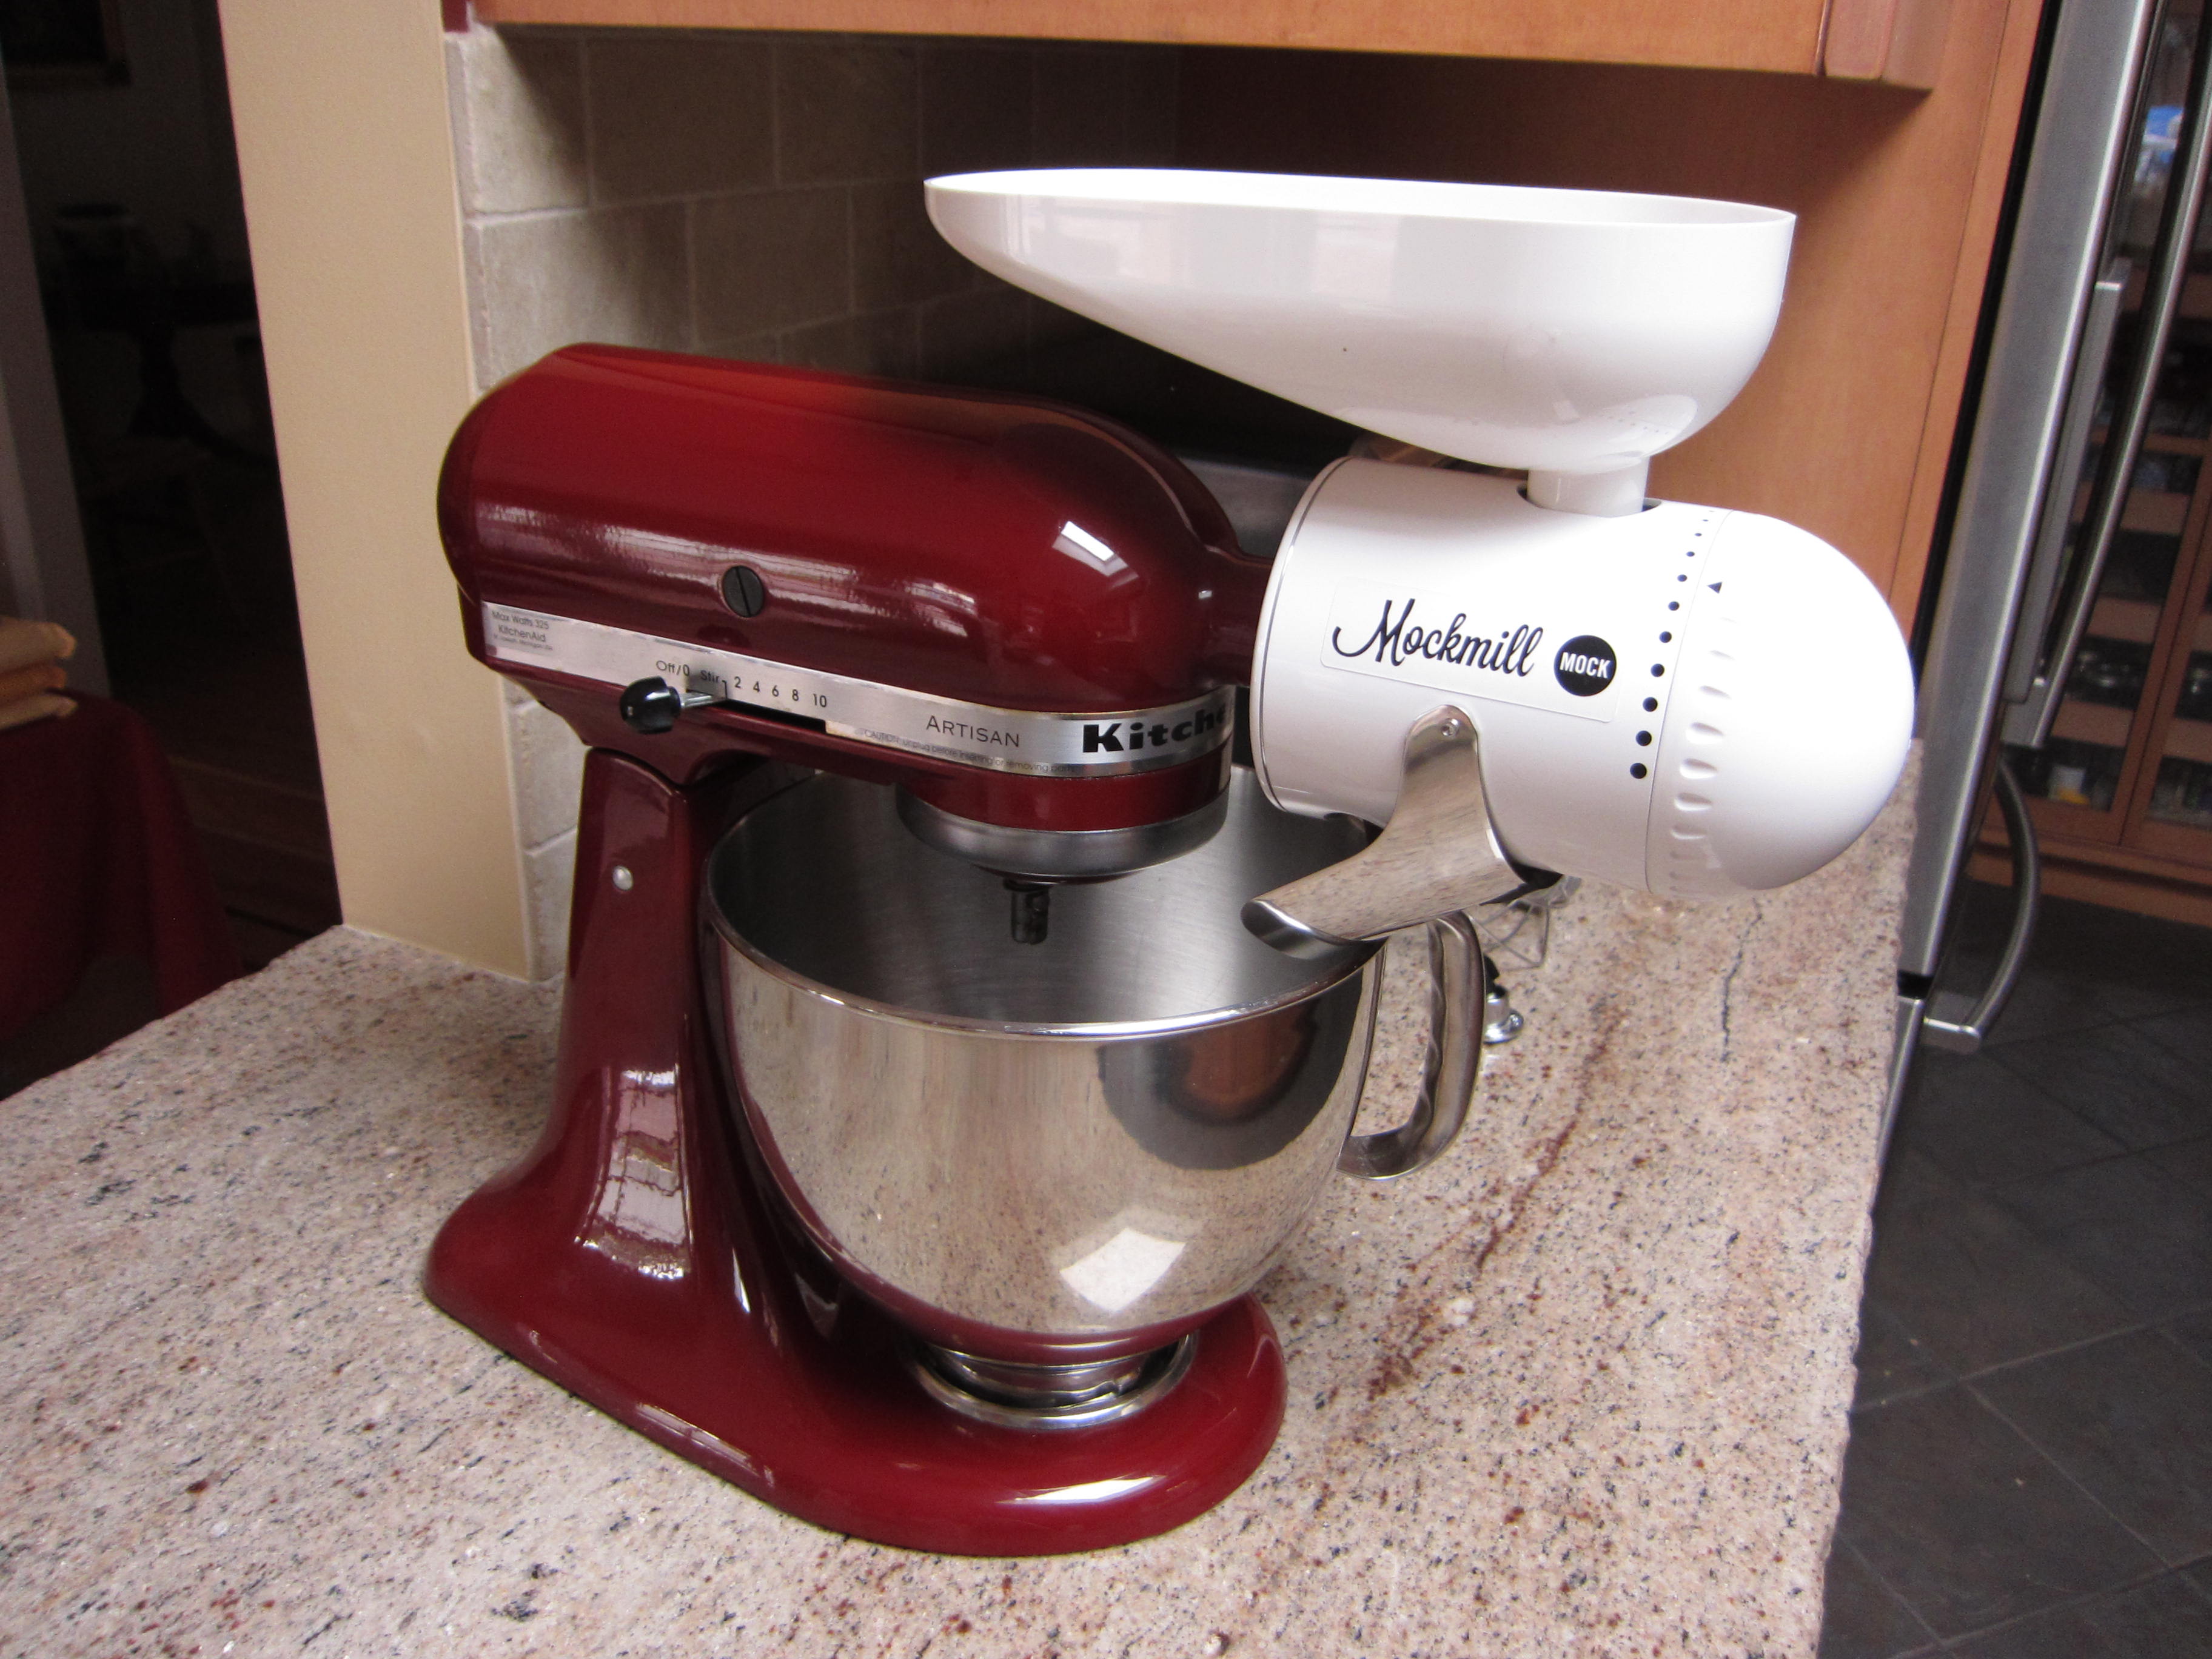 The Mockmill fits easily onto the Kitchenaid mixer and the metal shoot is designed to dump flour straight into the bowl below. 